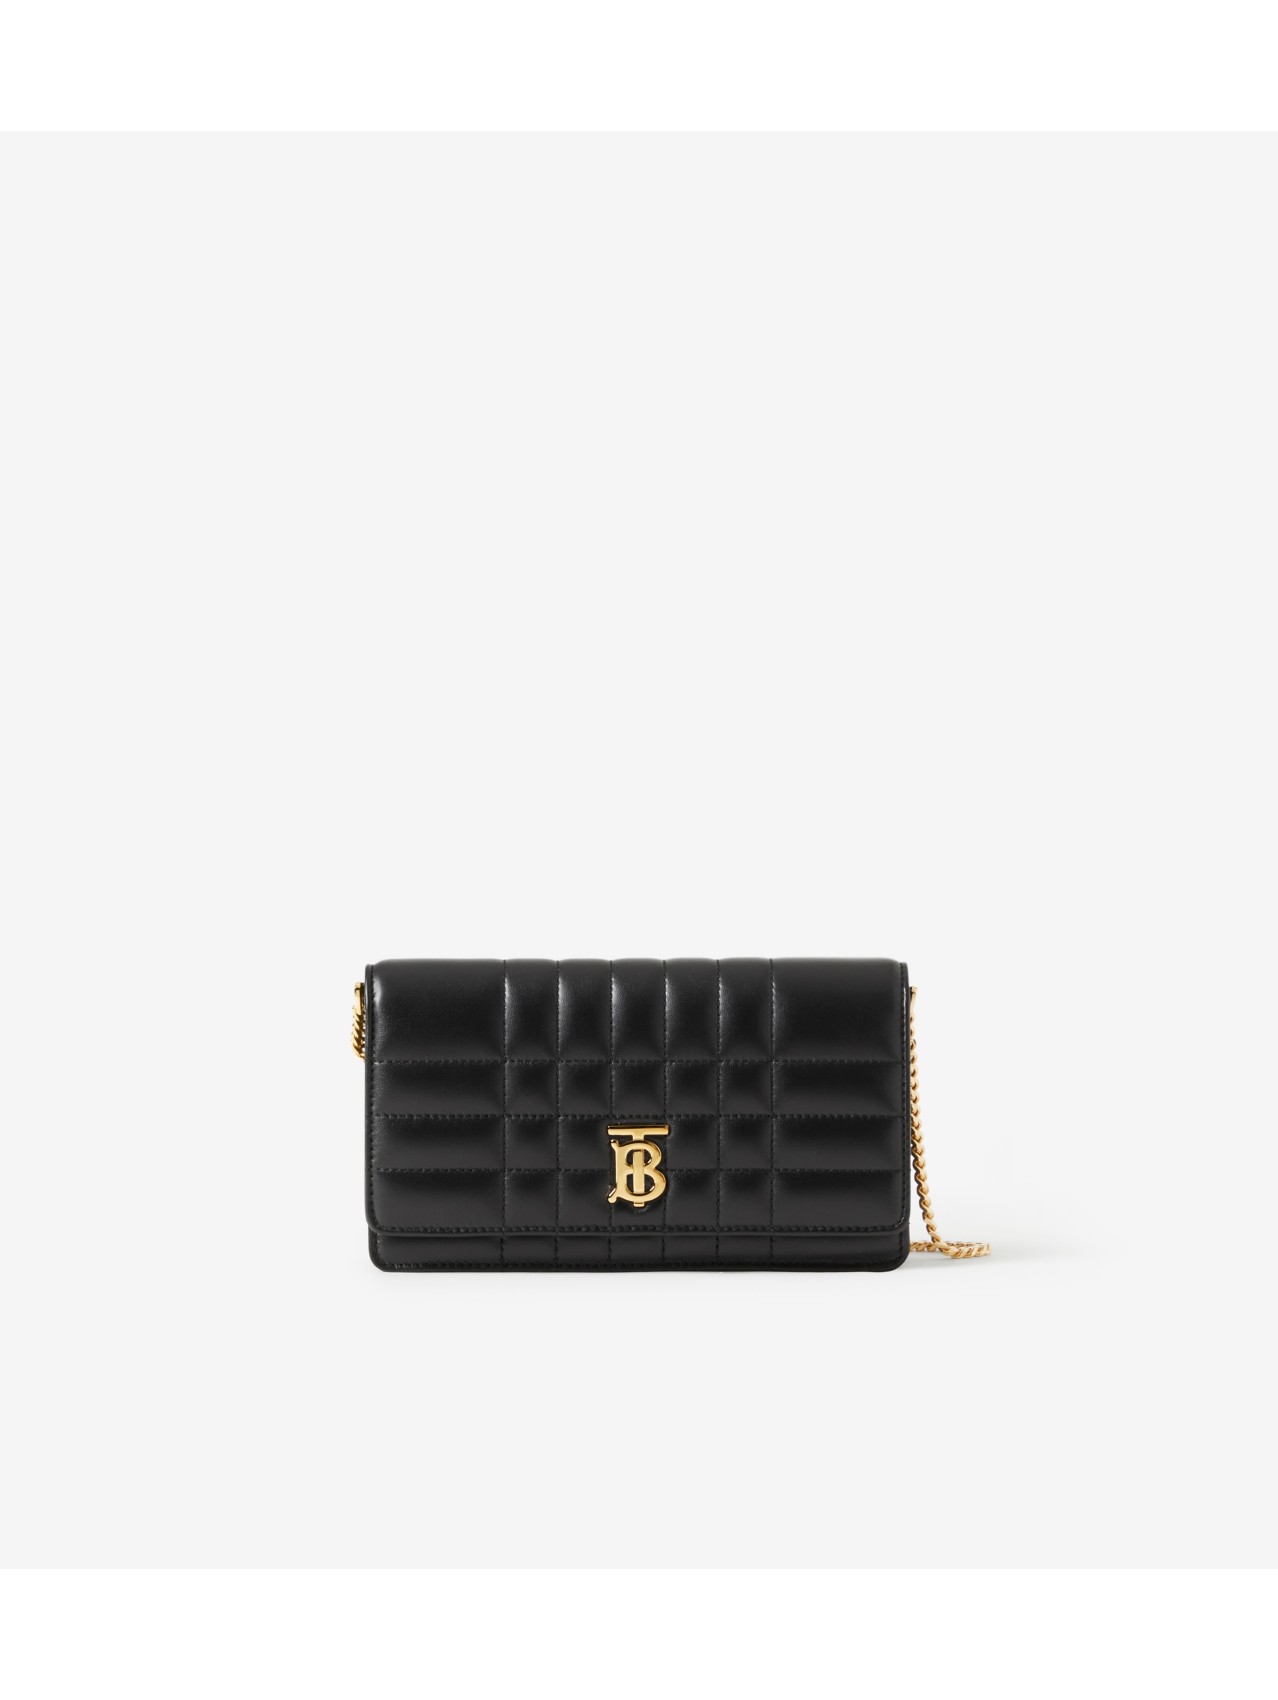 Burberry Lola Quilted Leather Crossbody Bag Black